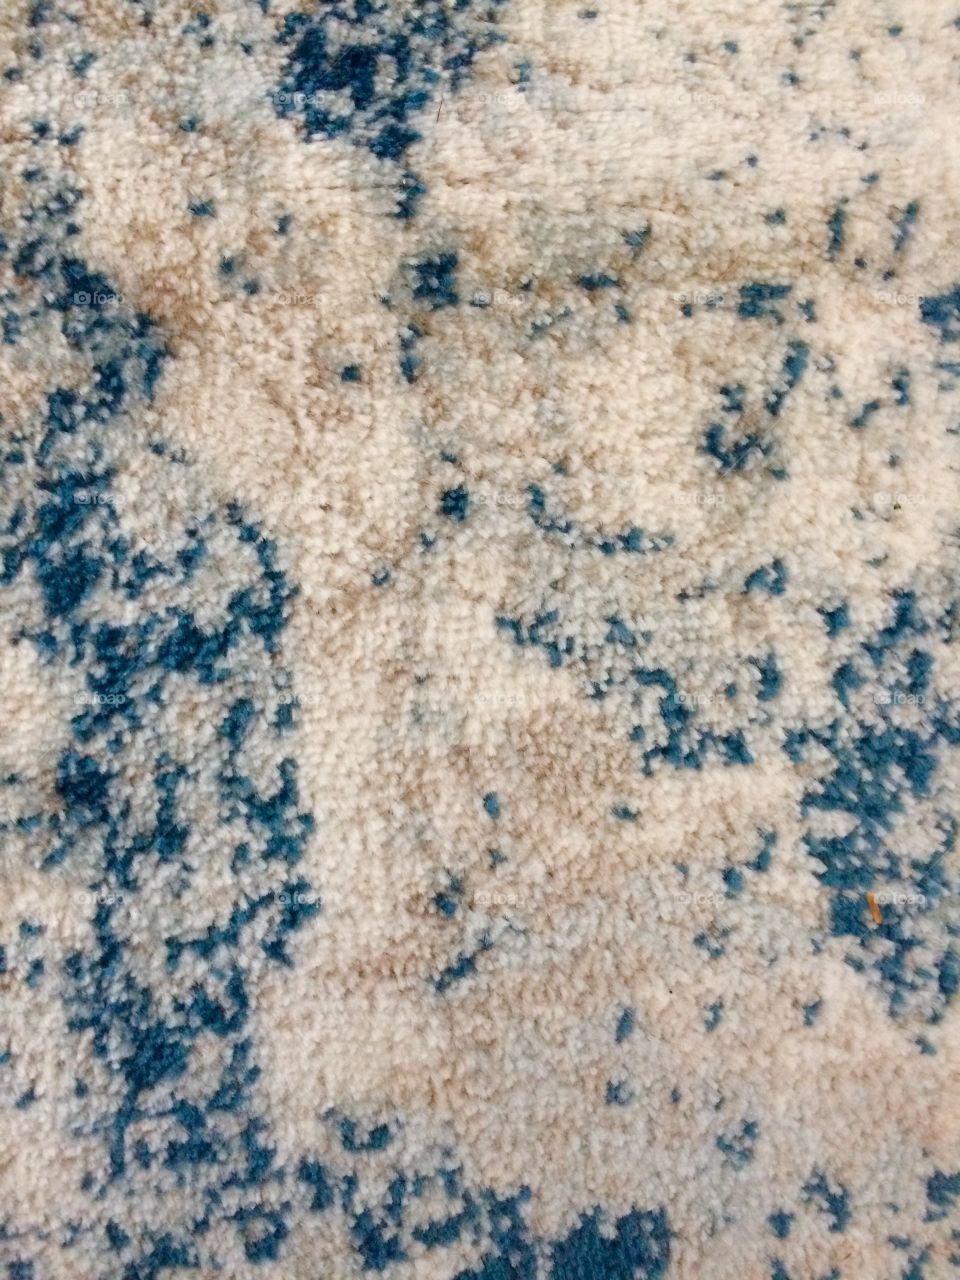 Carpet texture in blue and white